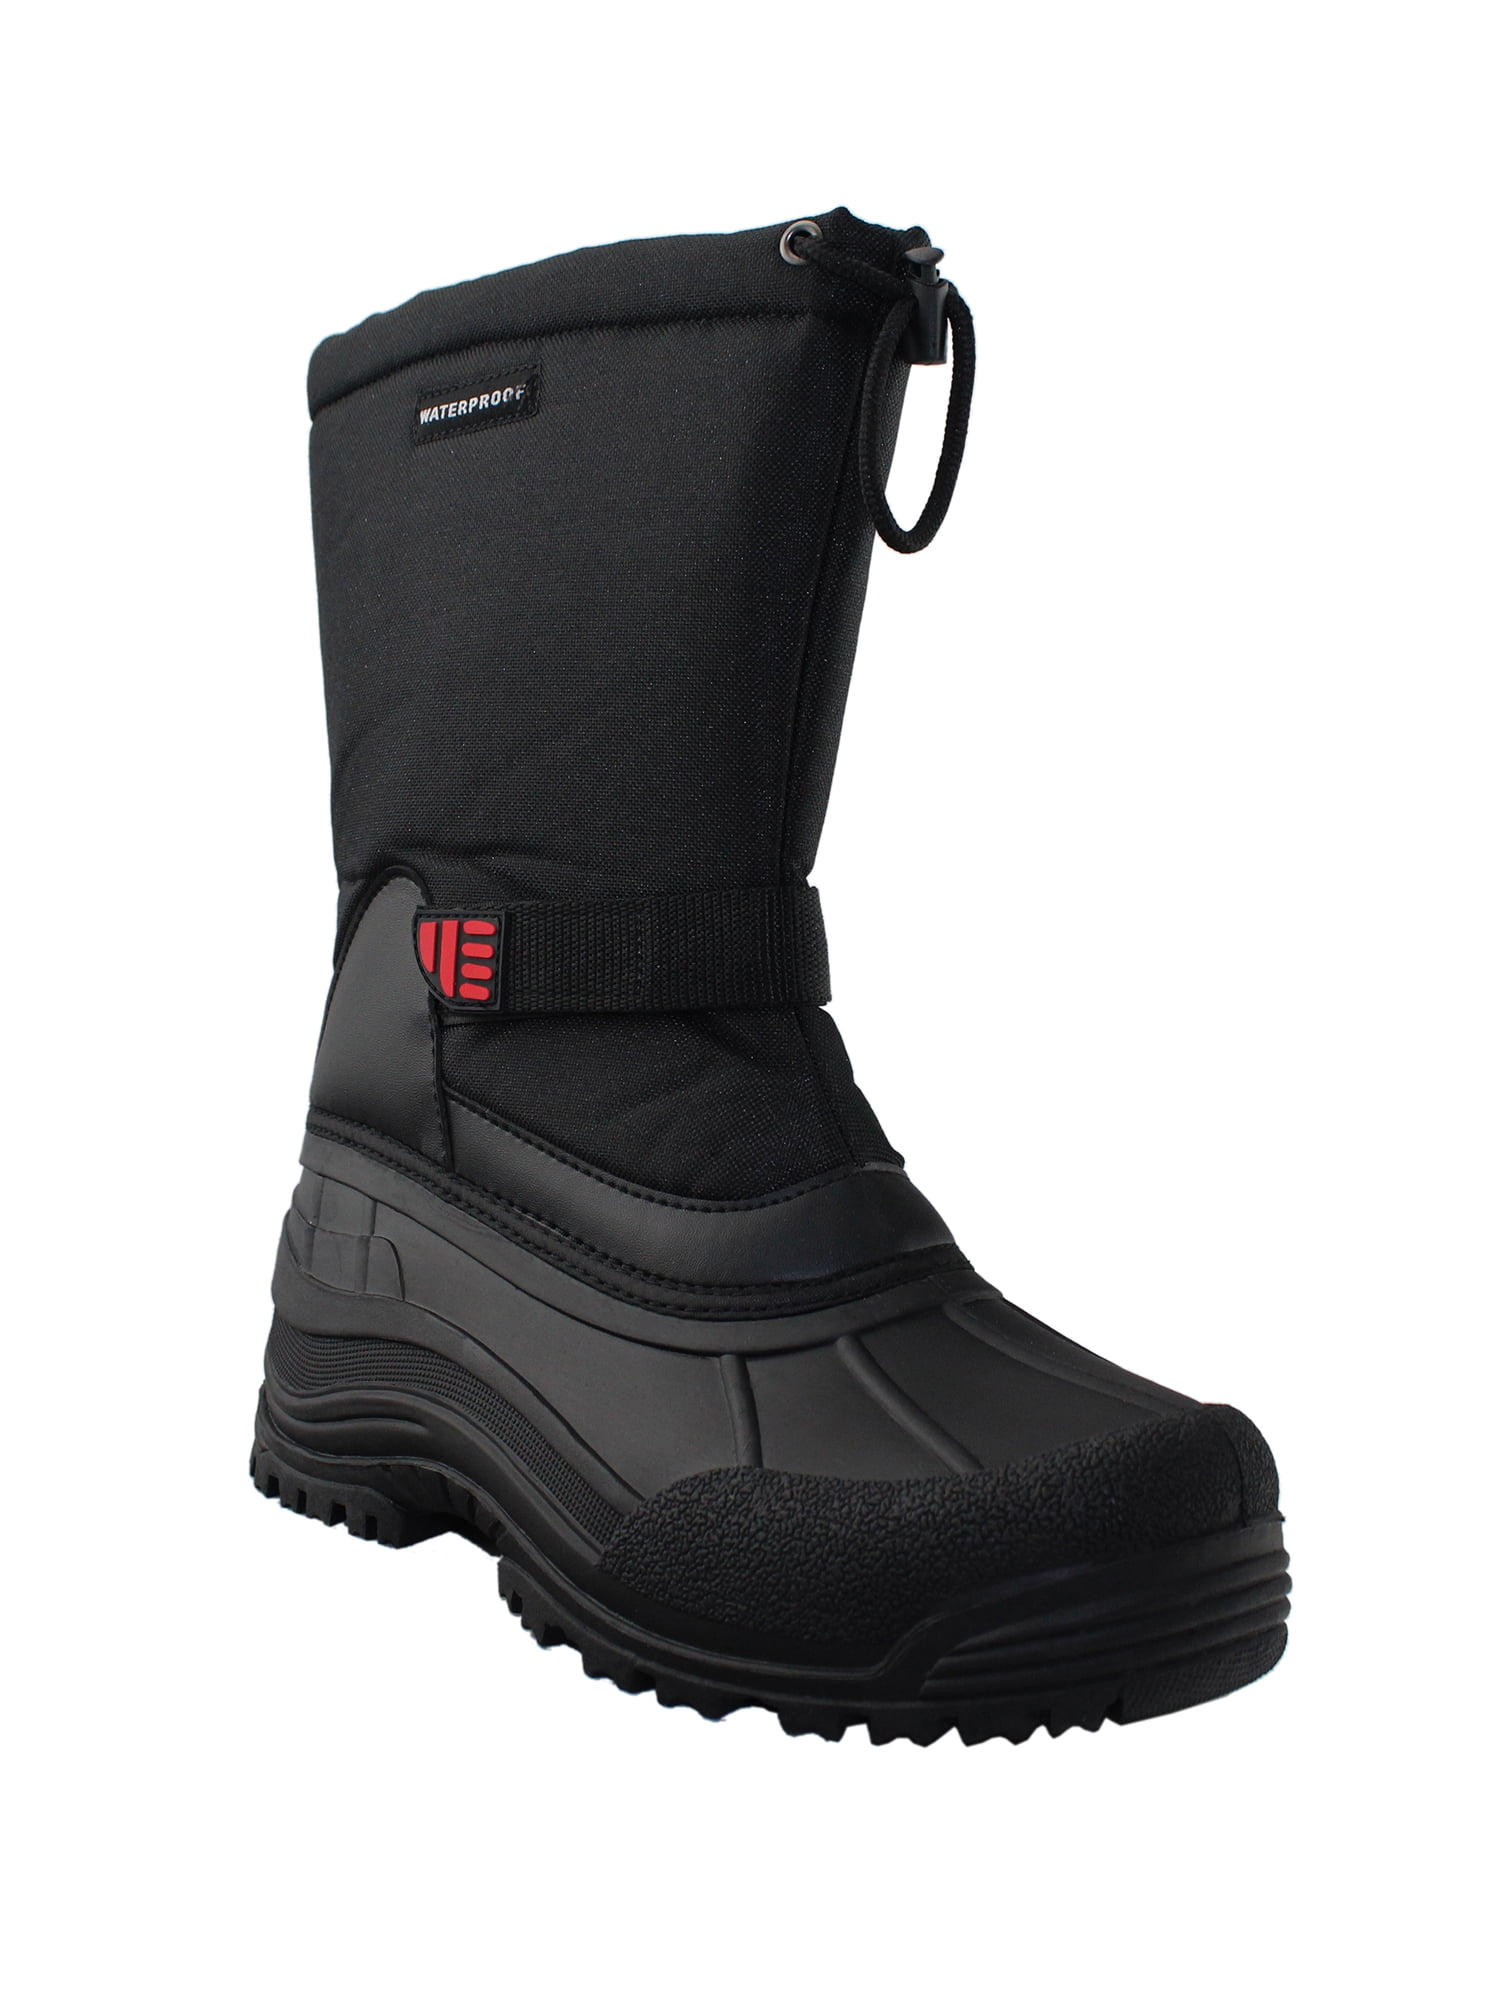 Tanleewa - Men Snow Duck Boots Waterproof Insulated Warm Boots With ...